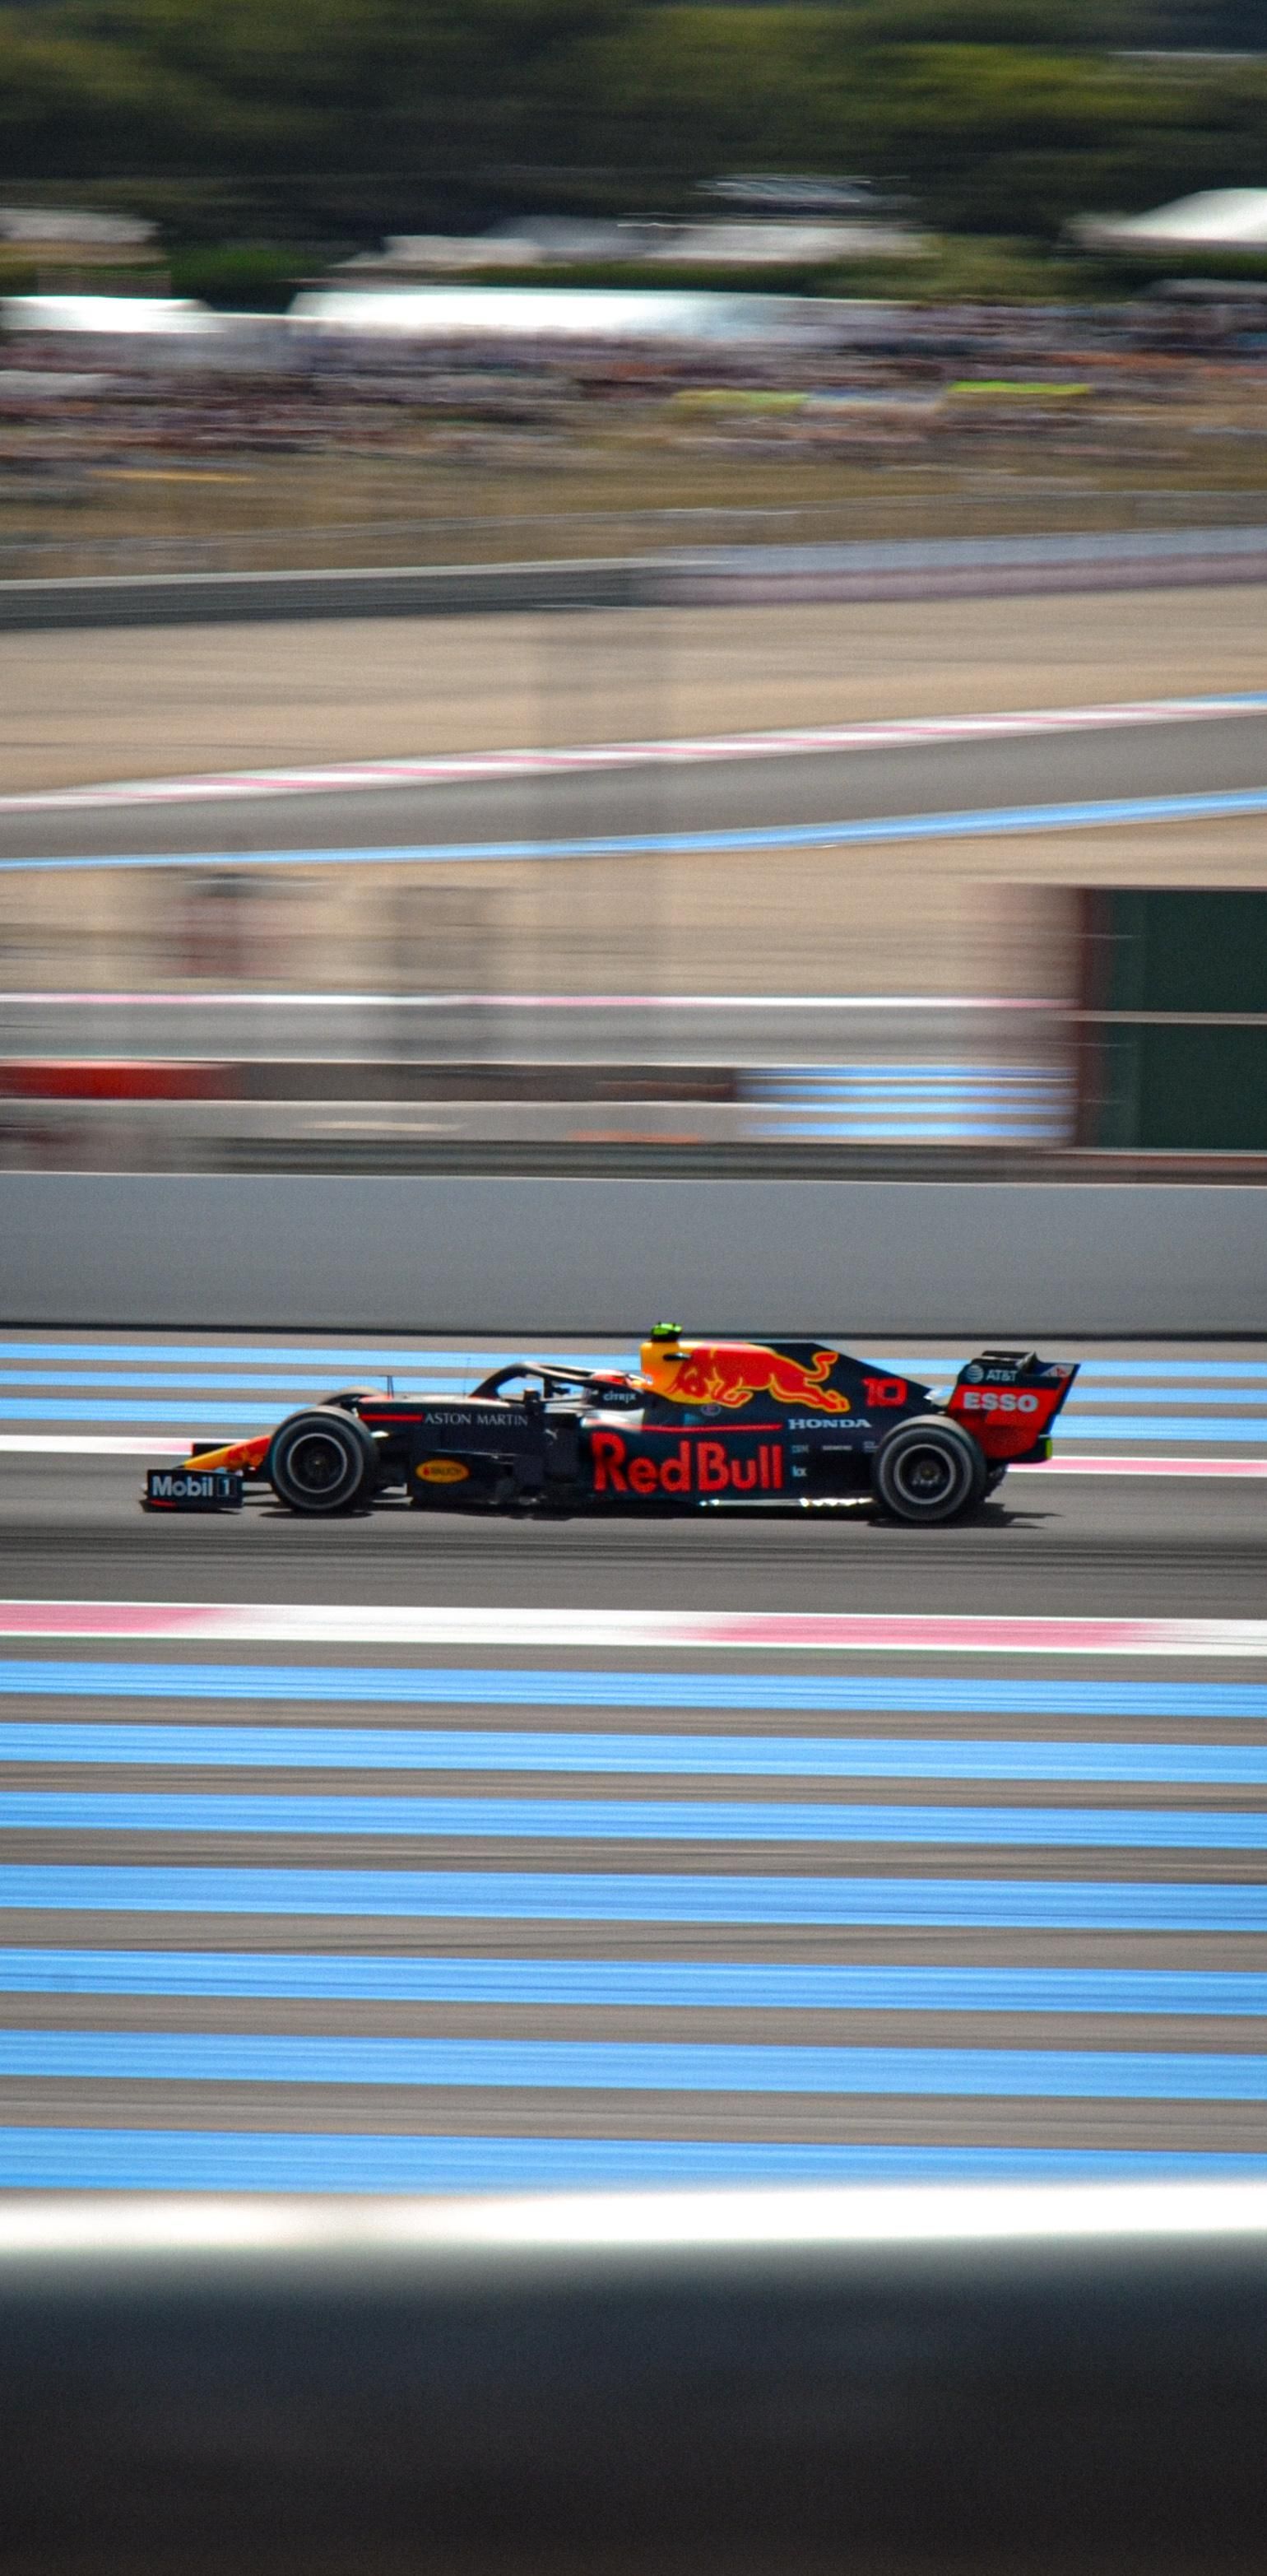 OC Red Bull's F1 driver Pierre Gasly during the French Grand Prix. French grand prix, Red bull f Grand prix